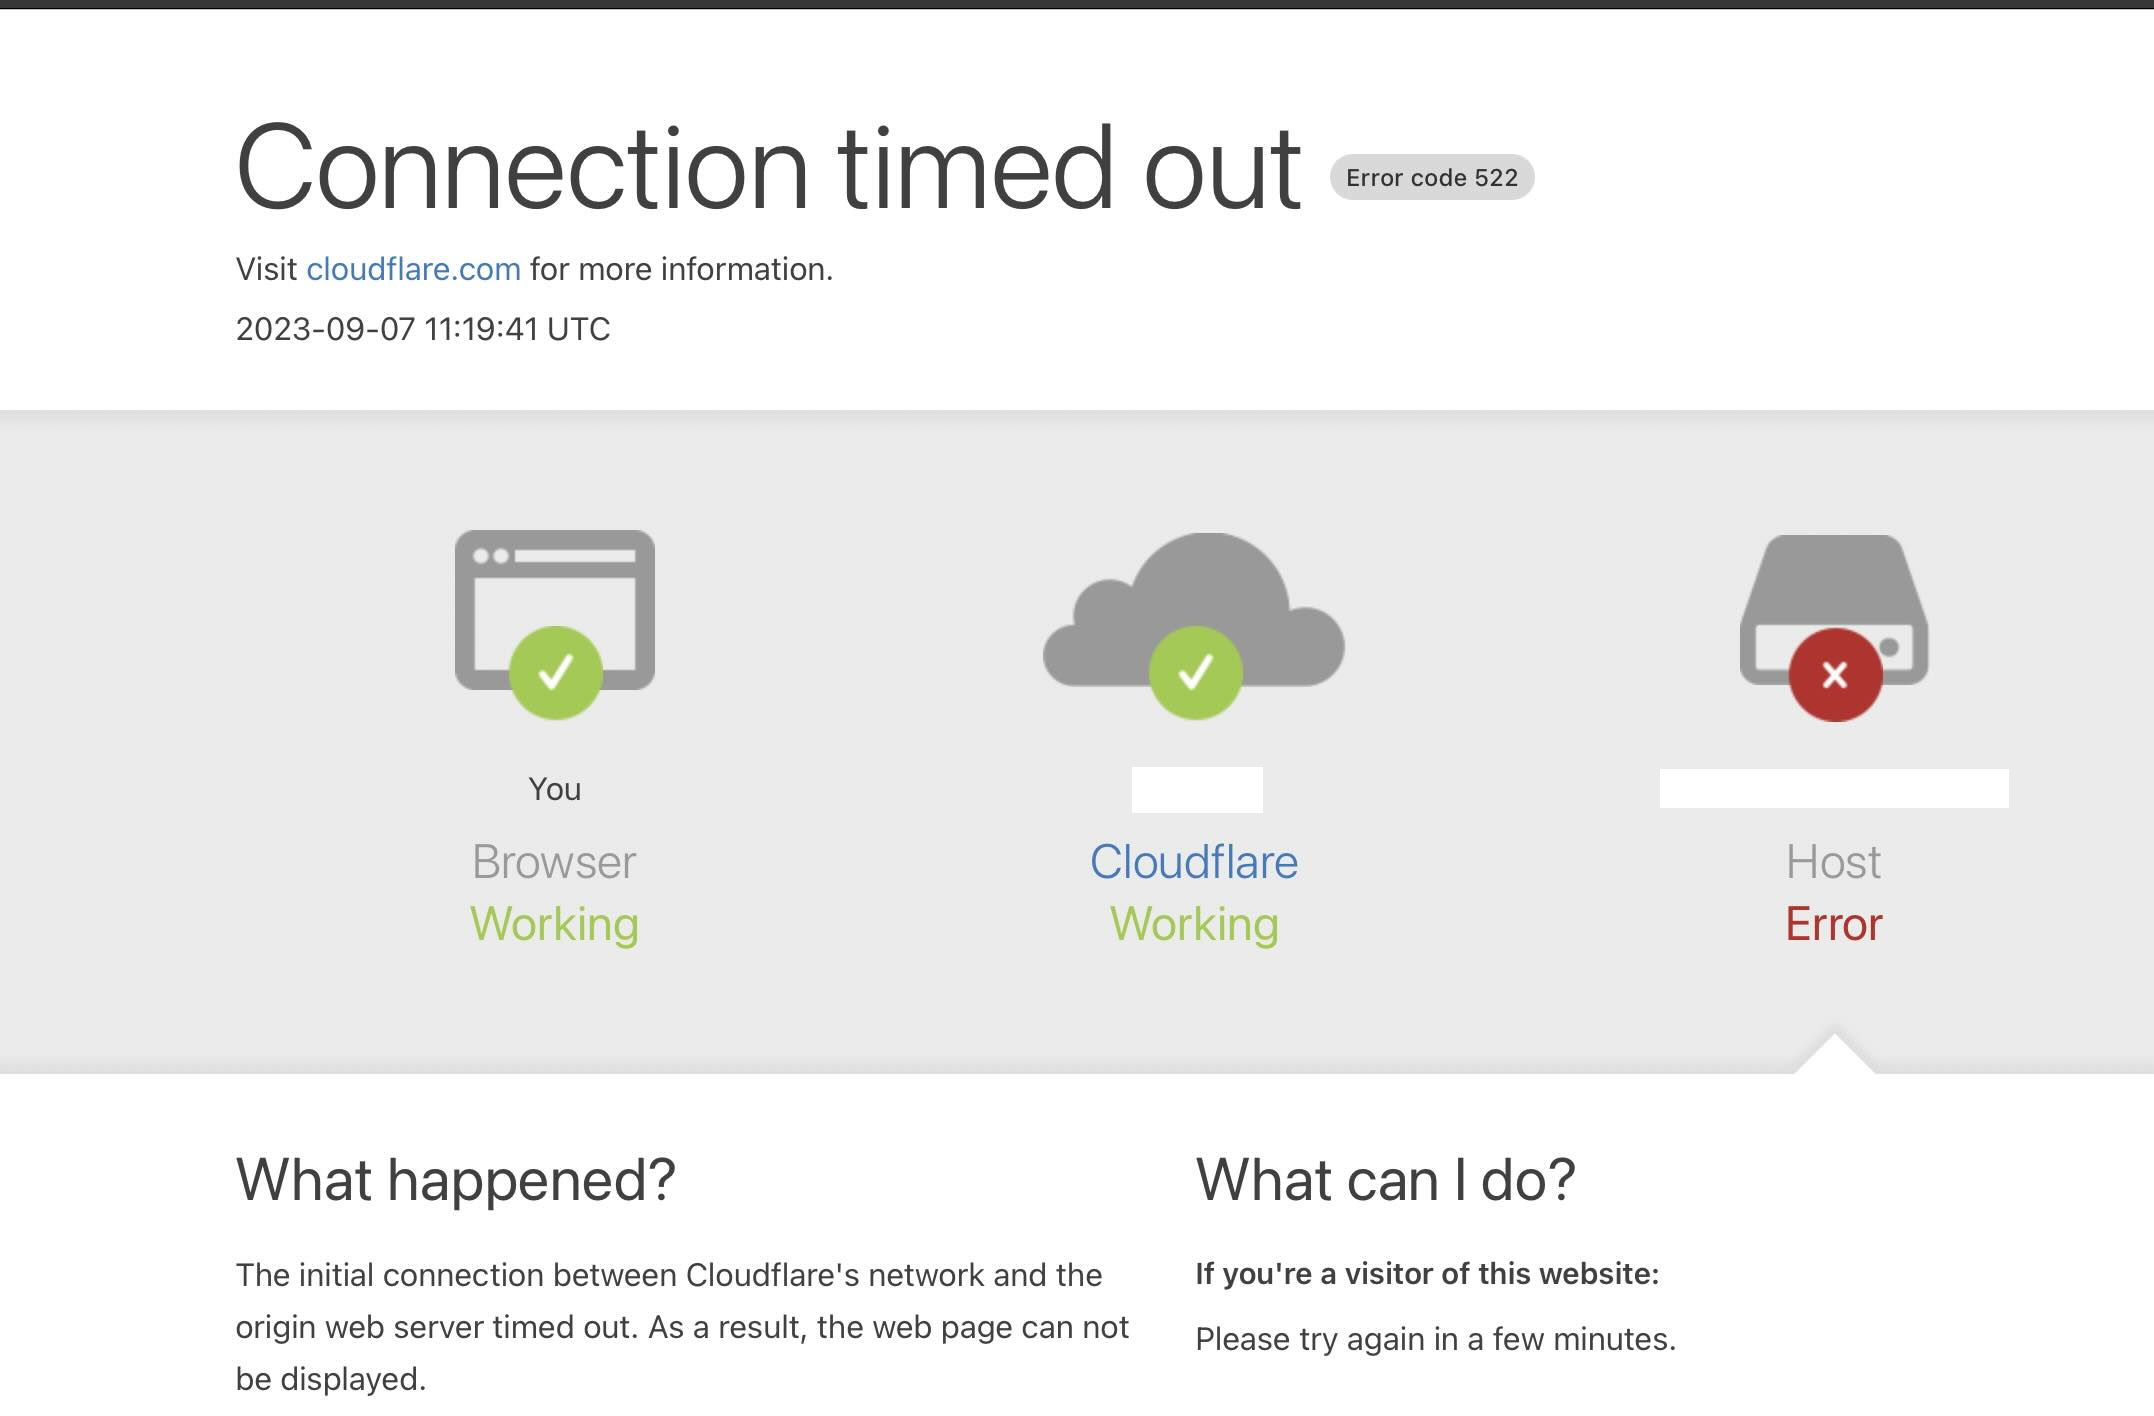 Cloudflare - Connection timed out - Error code 522